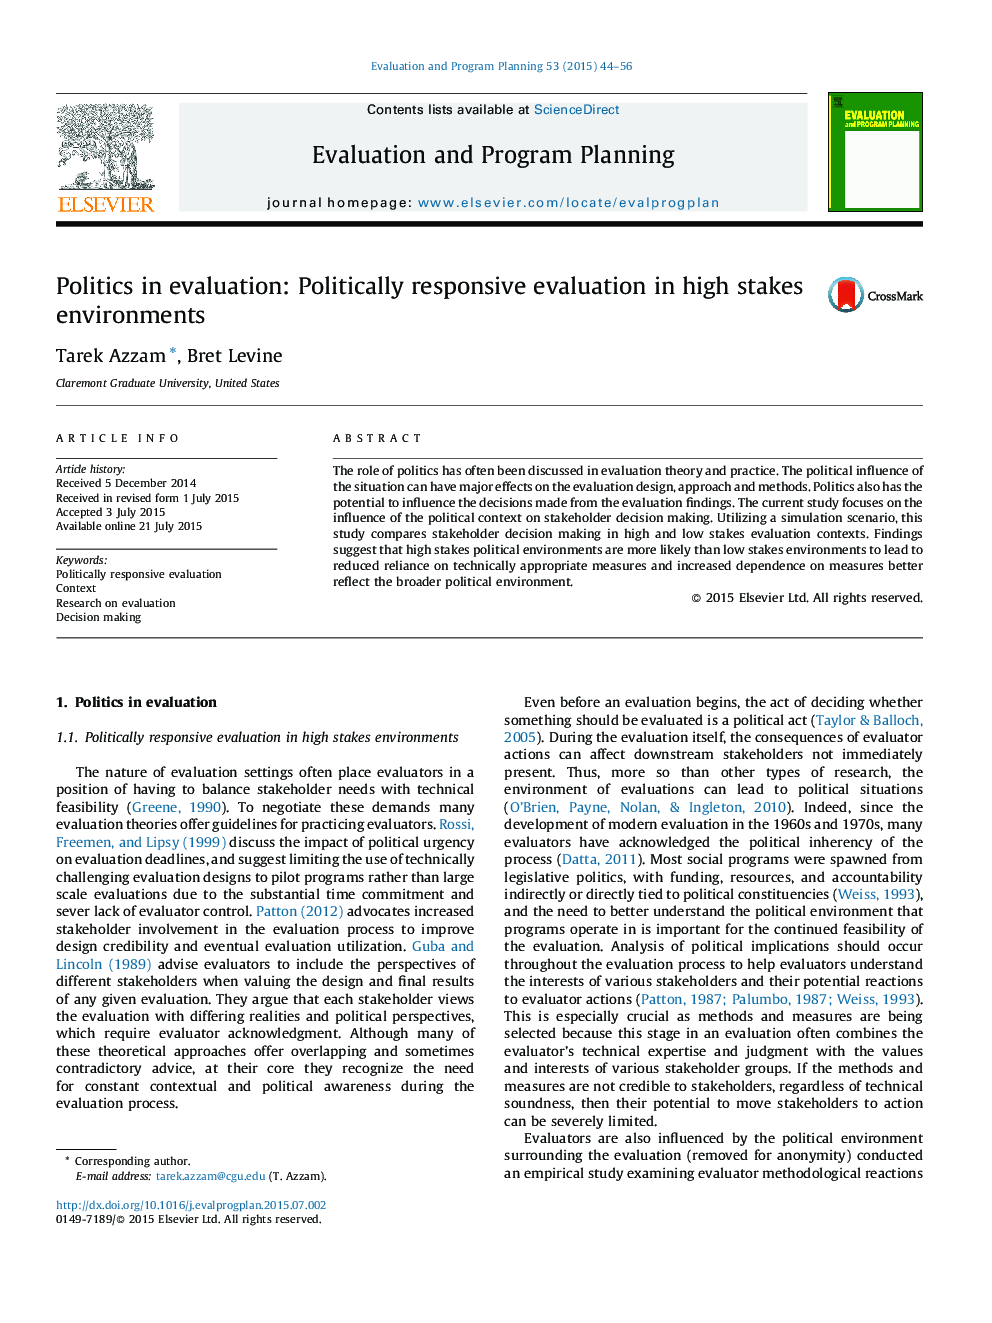 Politics in evaluation: Politically responsive evaluation in high stakes environments